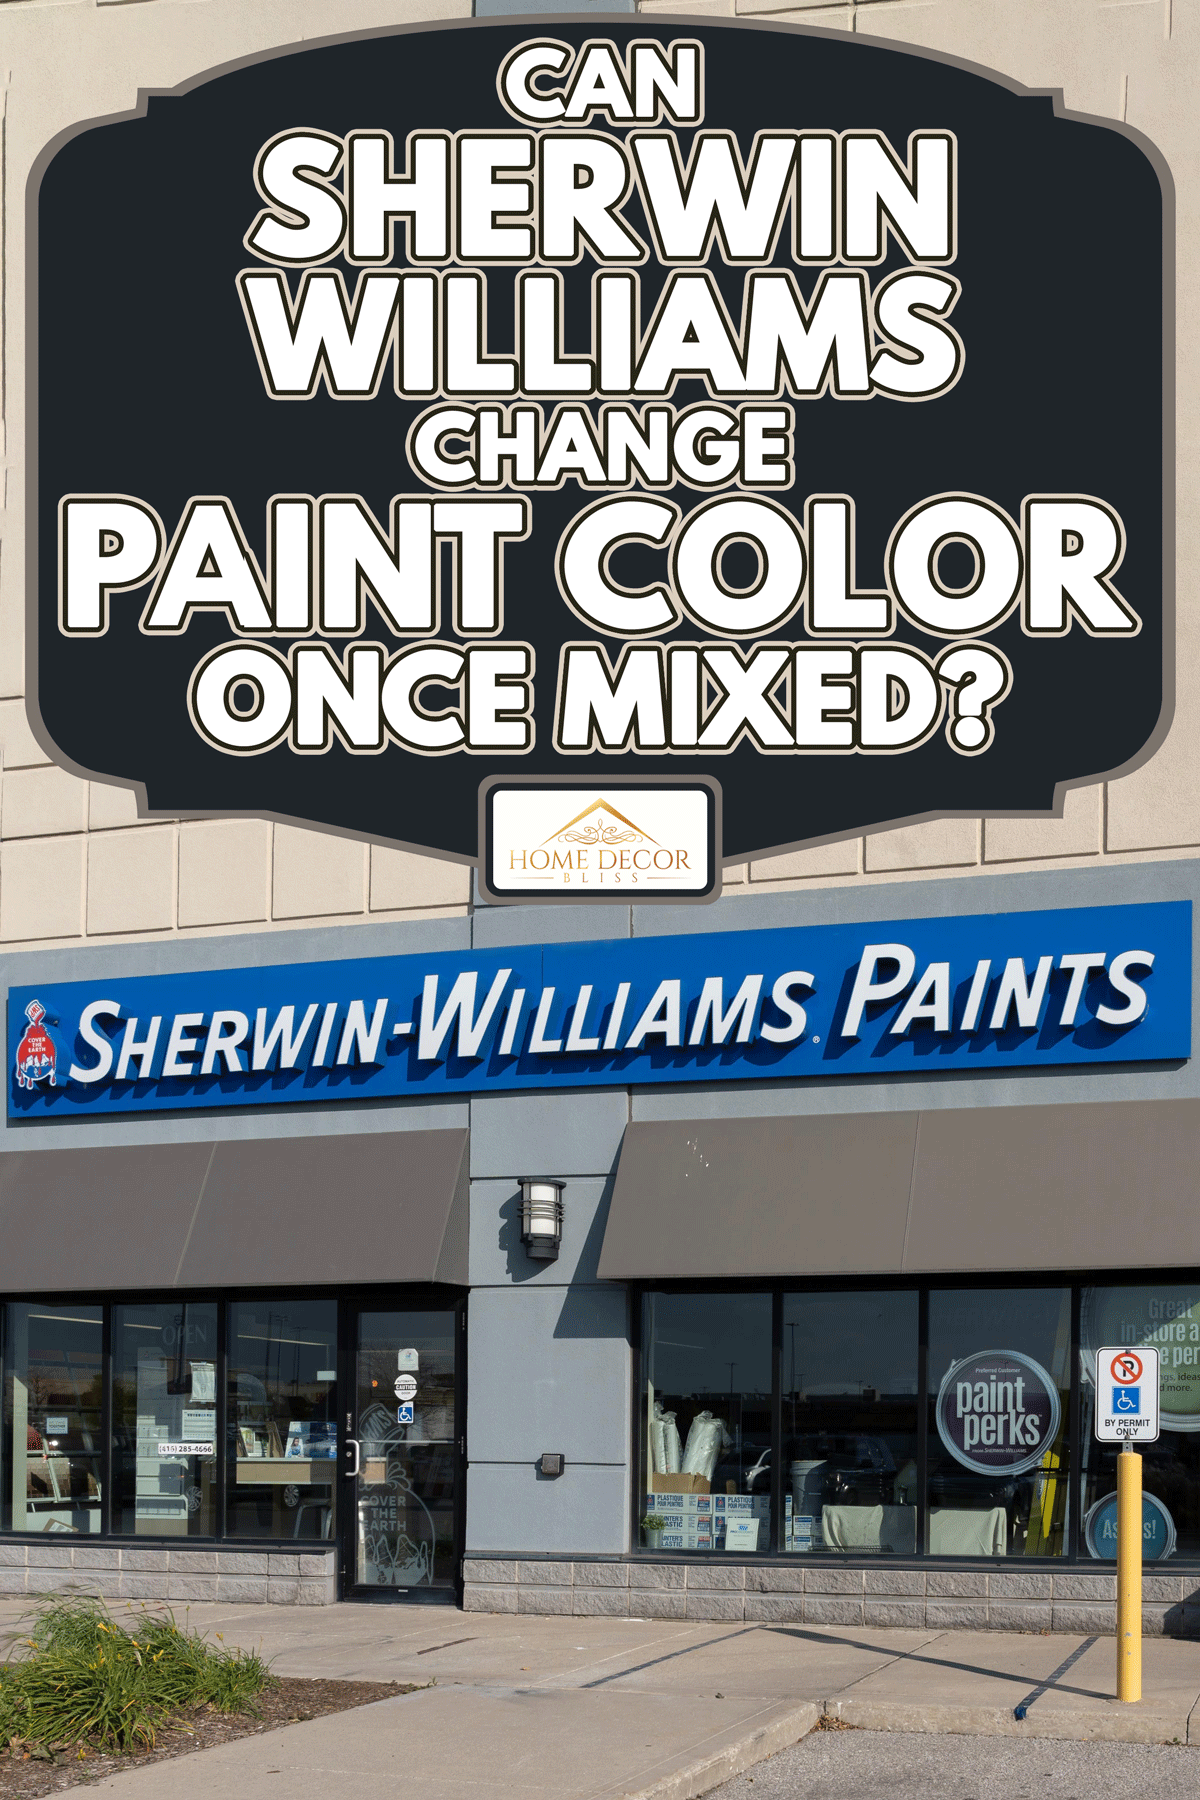 Sherwin-Williams paint store in Toronto, Can Sherwin Williams Change Paint Color Once Mixed?